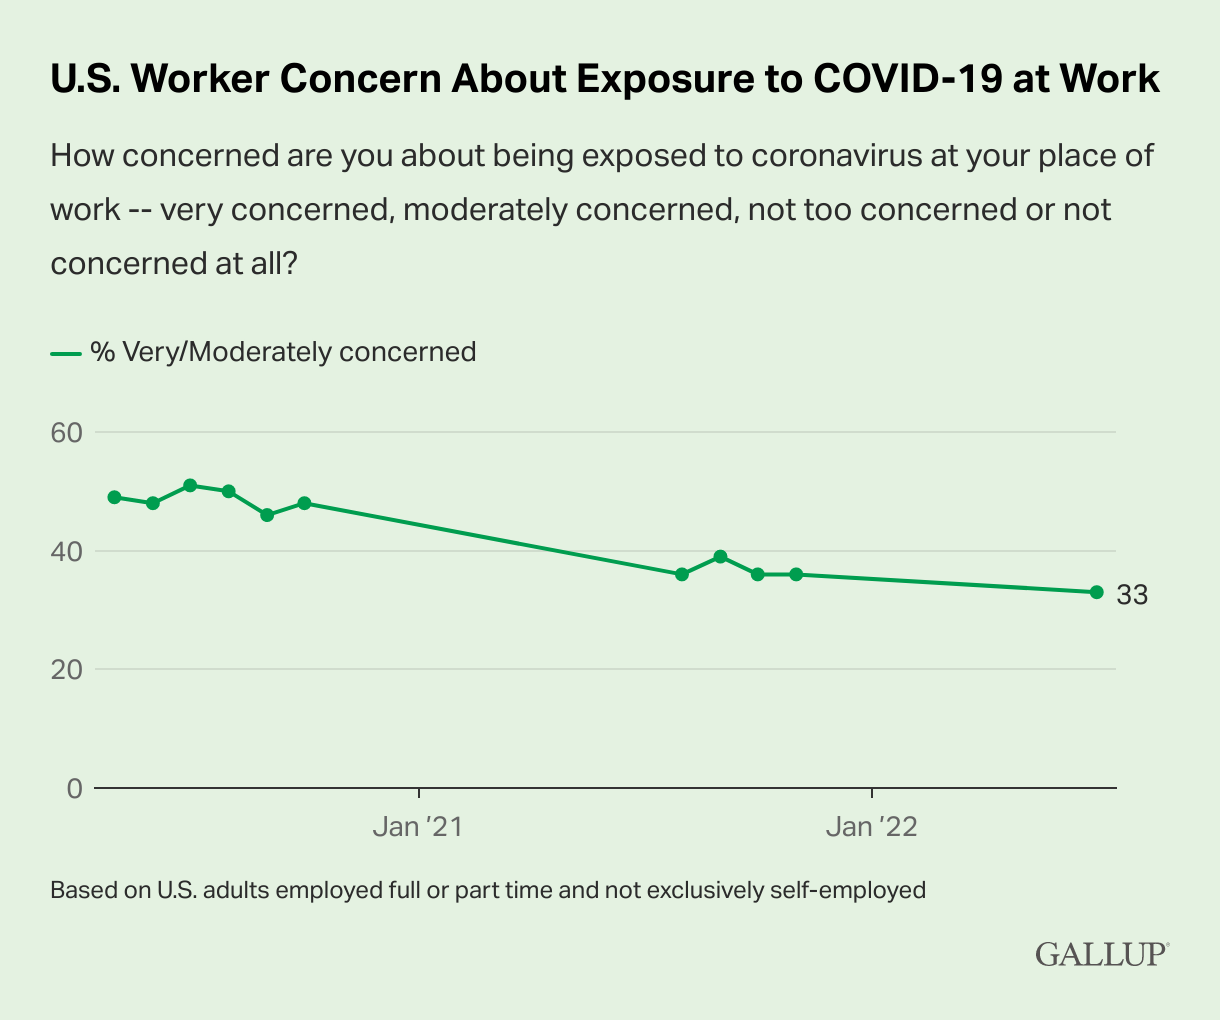 Overall concern about exposure to COVID-19 at work